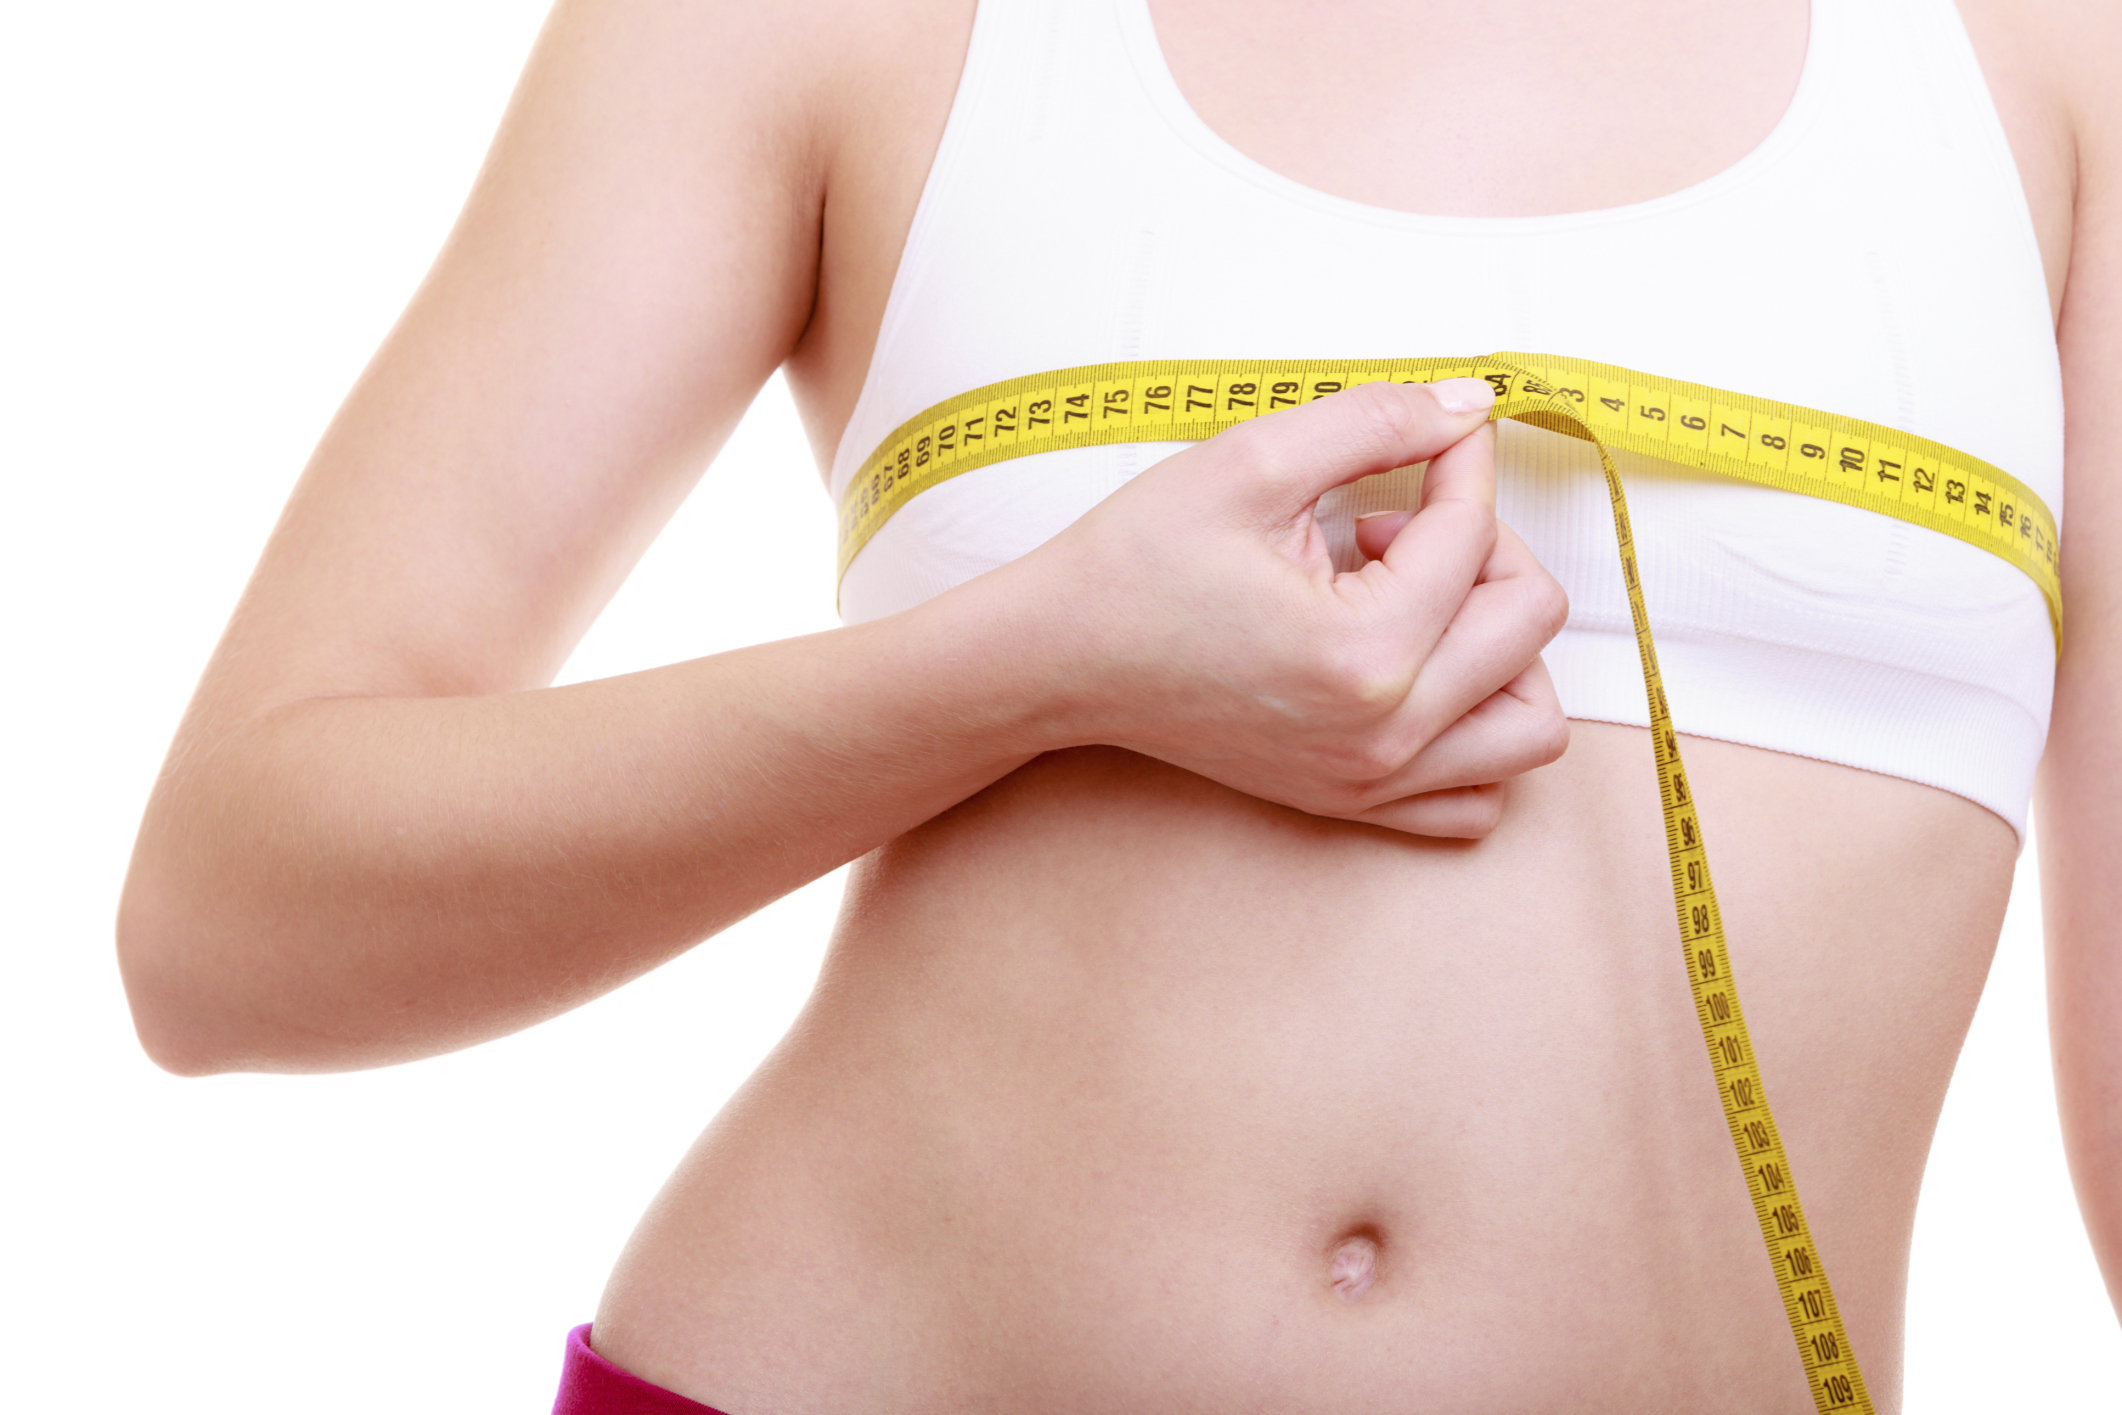 How to Lose Weight, But Not Your Breast Size